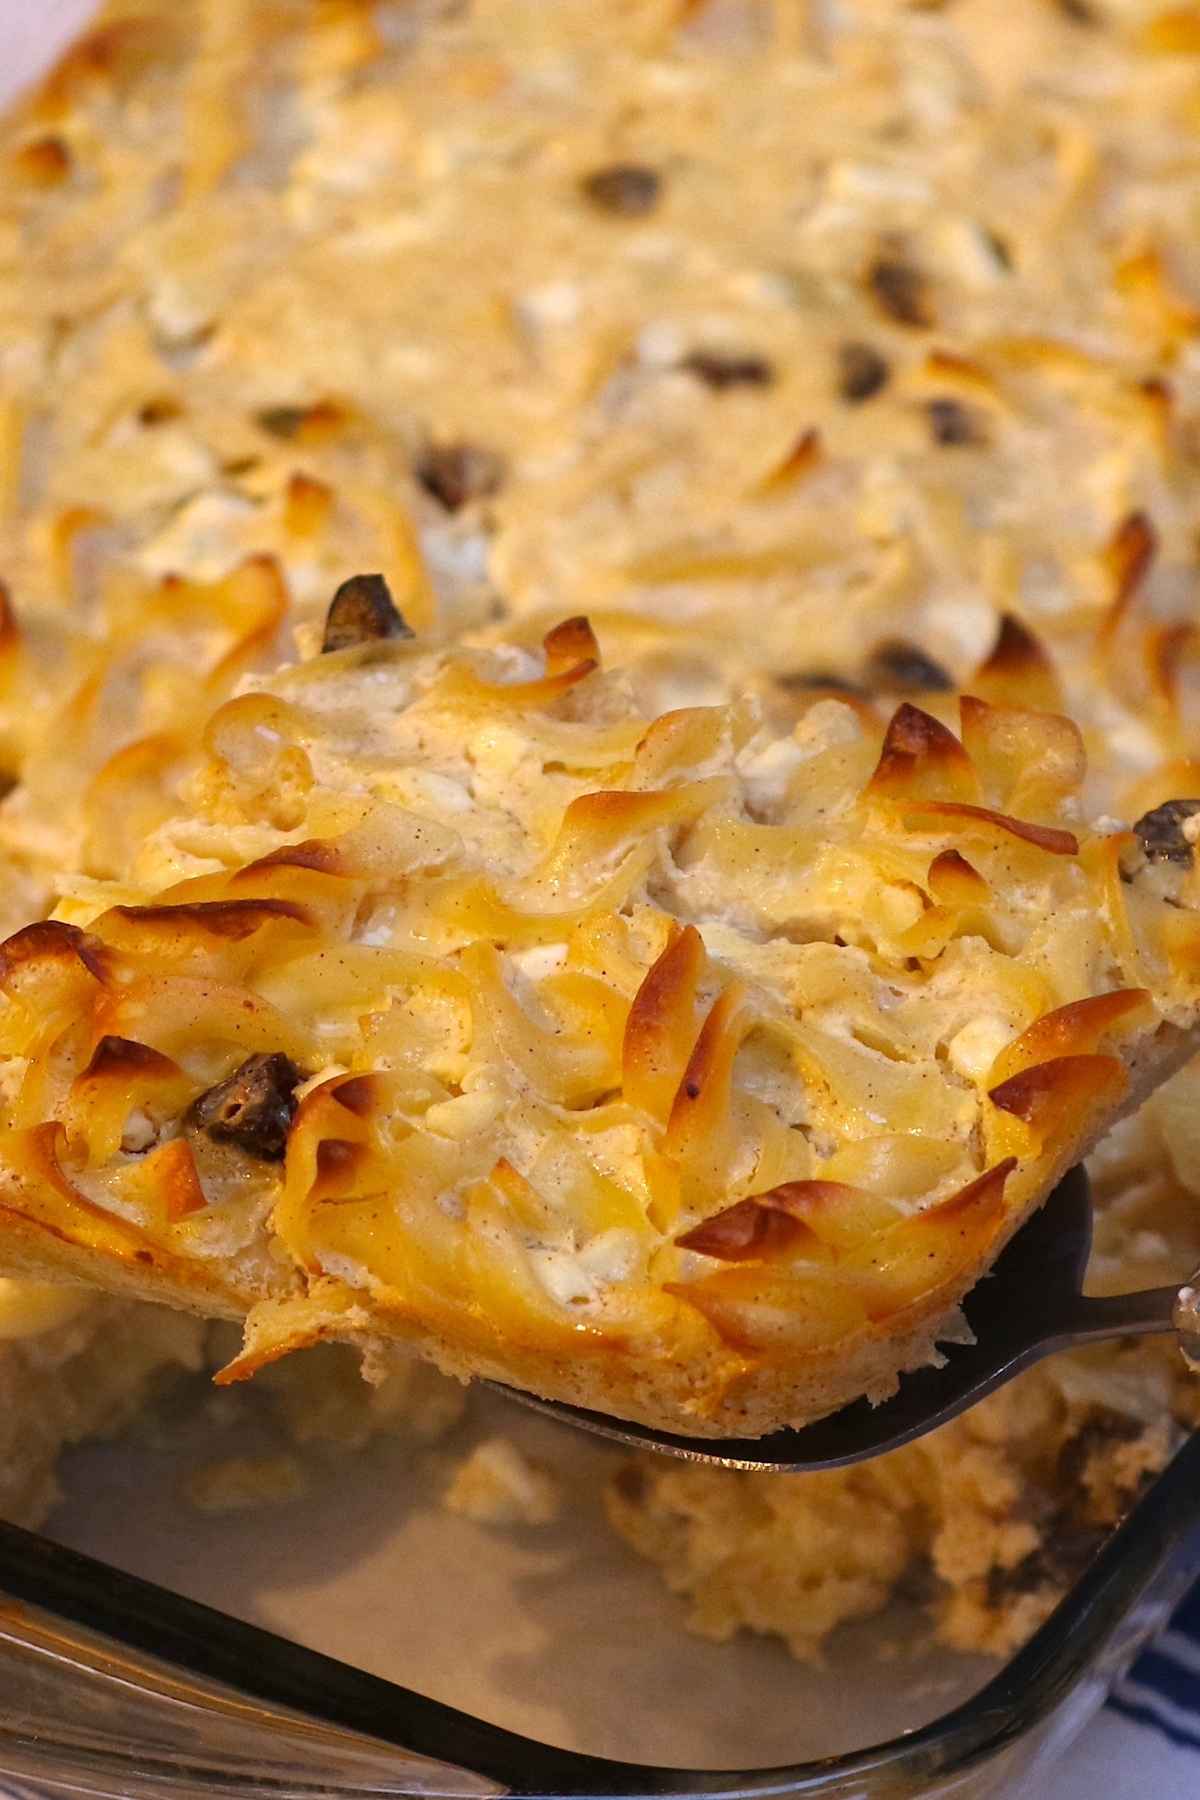 Kugel is a Jewish dish that’s made with noodles and is similar to a casserole. If you didn’t grow up enjoying this rich and hearty dish, you’re in for a treat. Perfect as a side dish, Noodle Kugel pairs well with meat, fish, and vegetables, or even can be enjoyed as a sweet treat for breakfast!